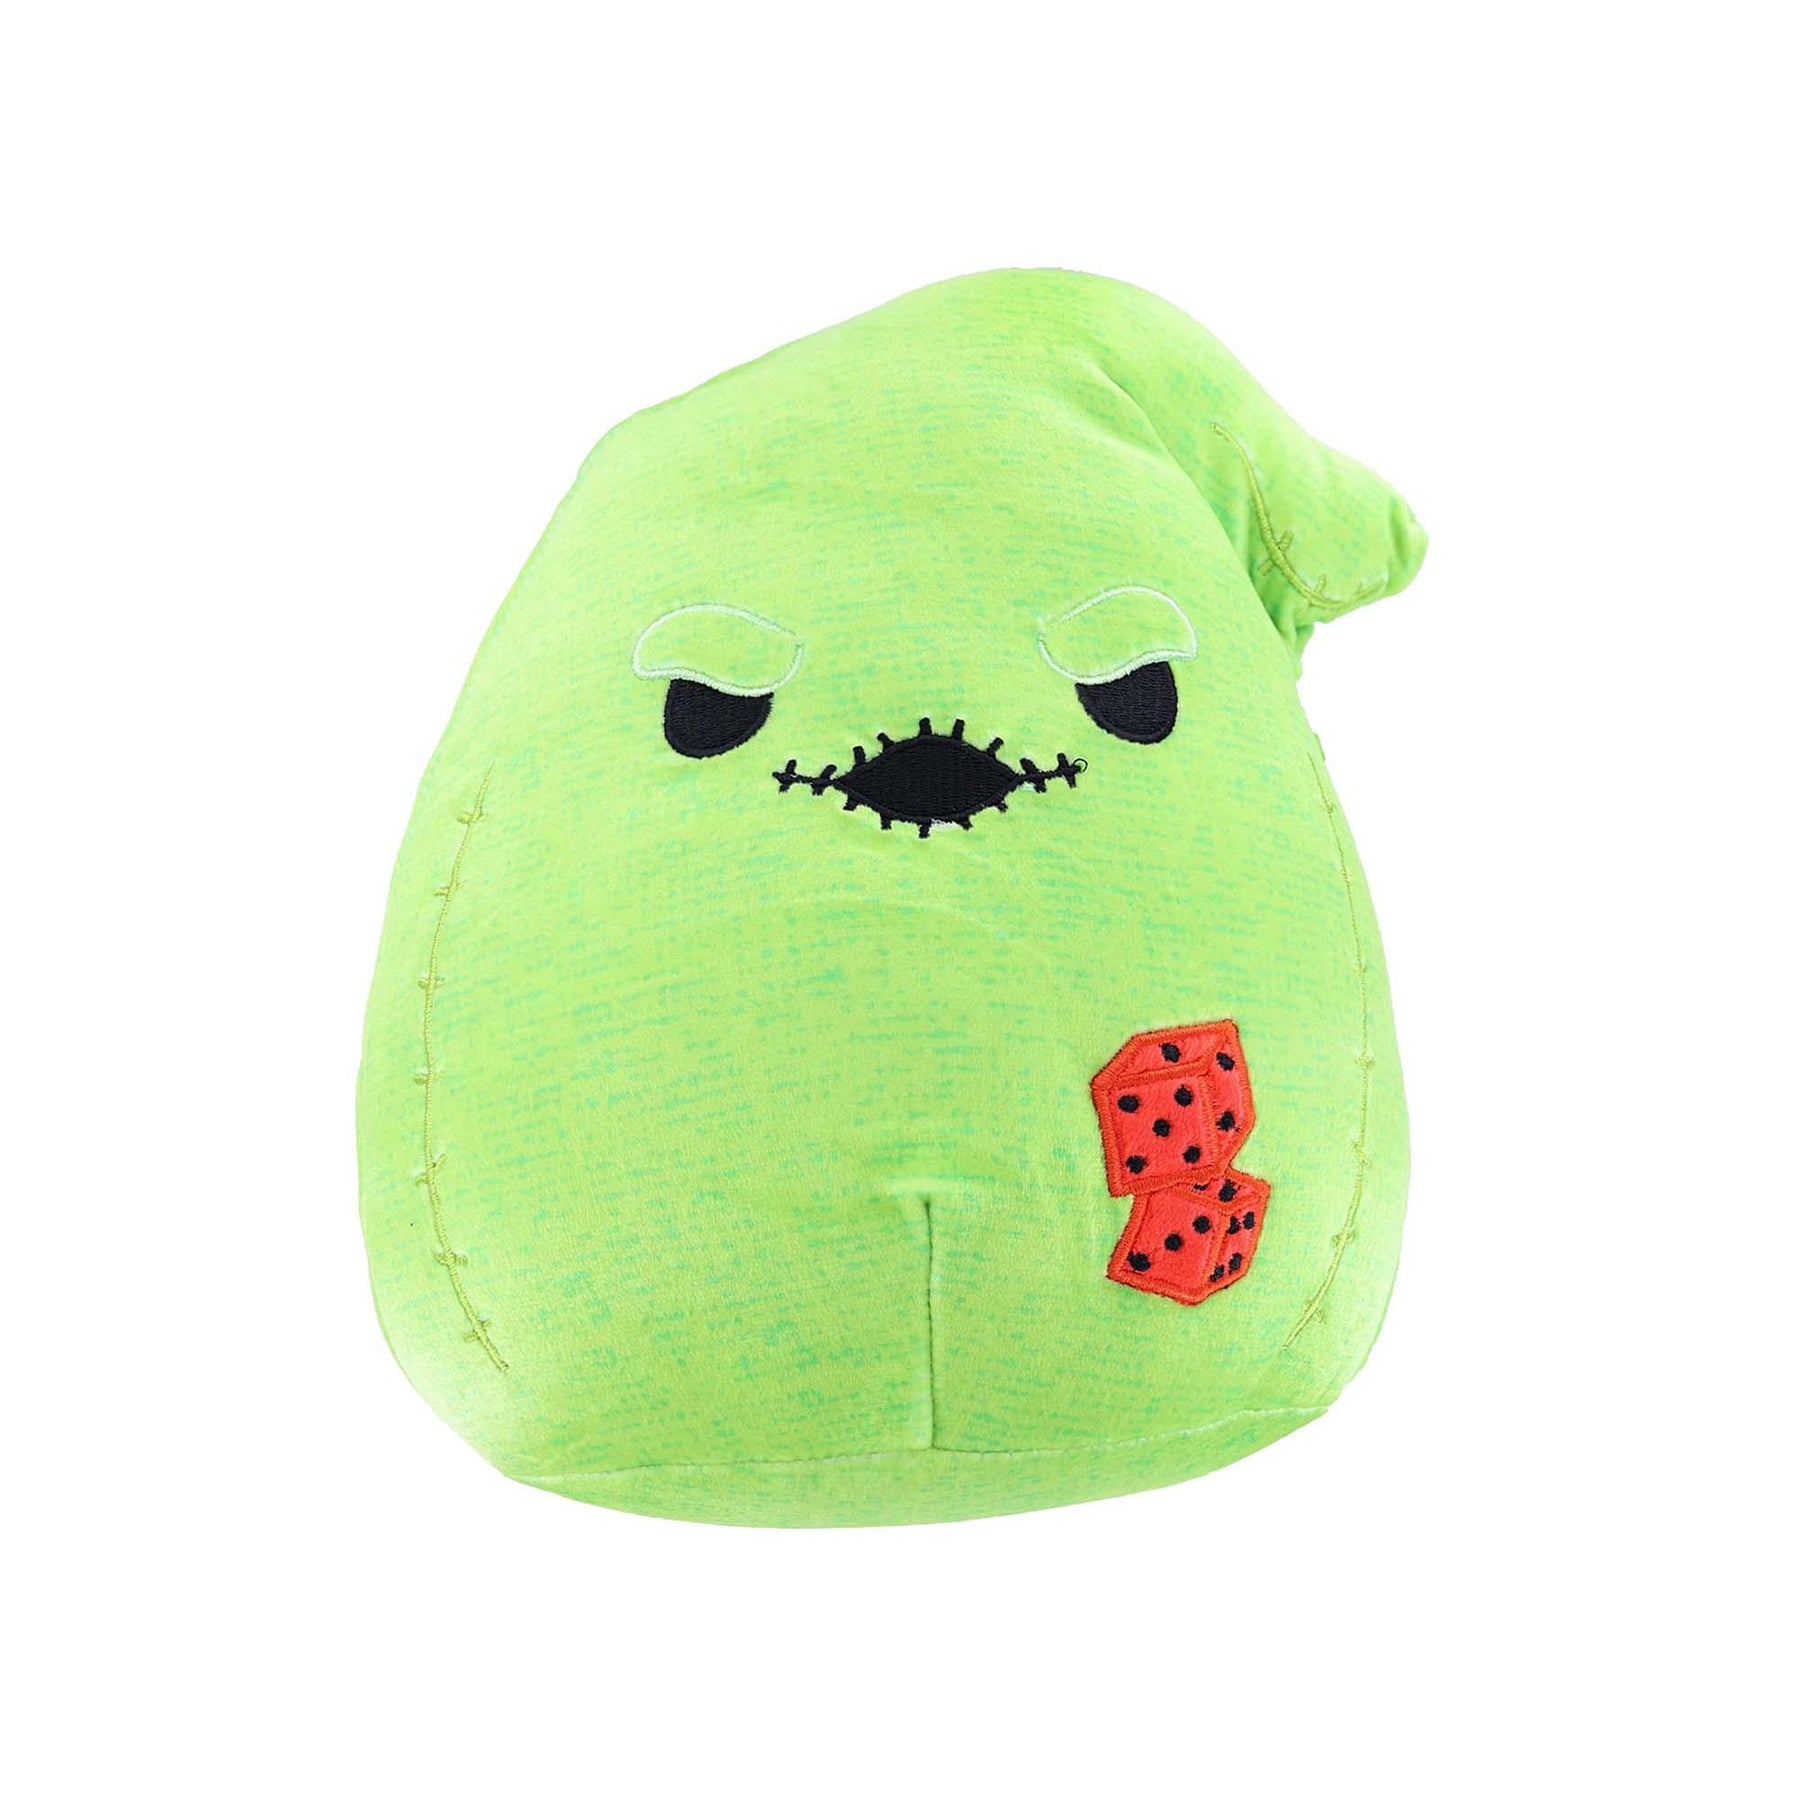 Nightmare Before Christmas Squishmallow 5 Inch Plush | Oogie Boogie